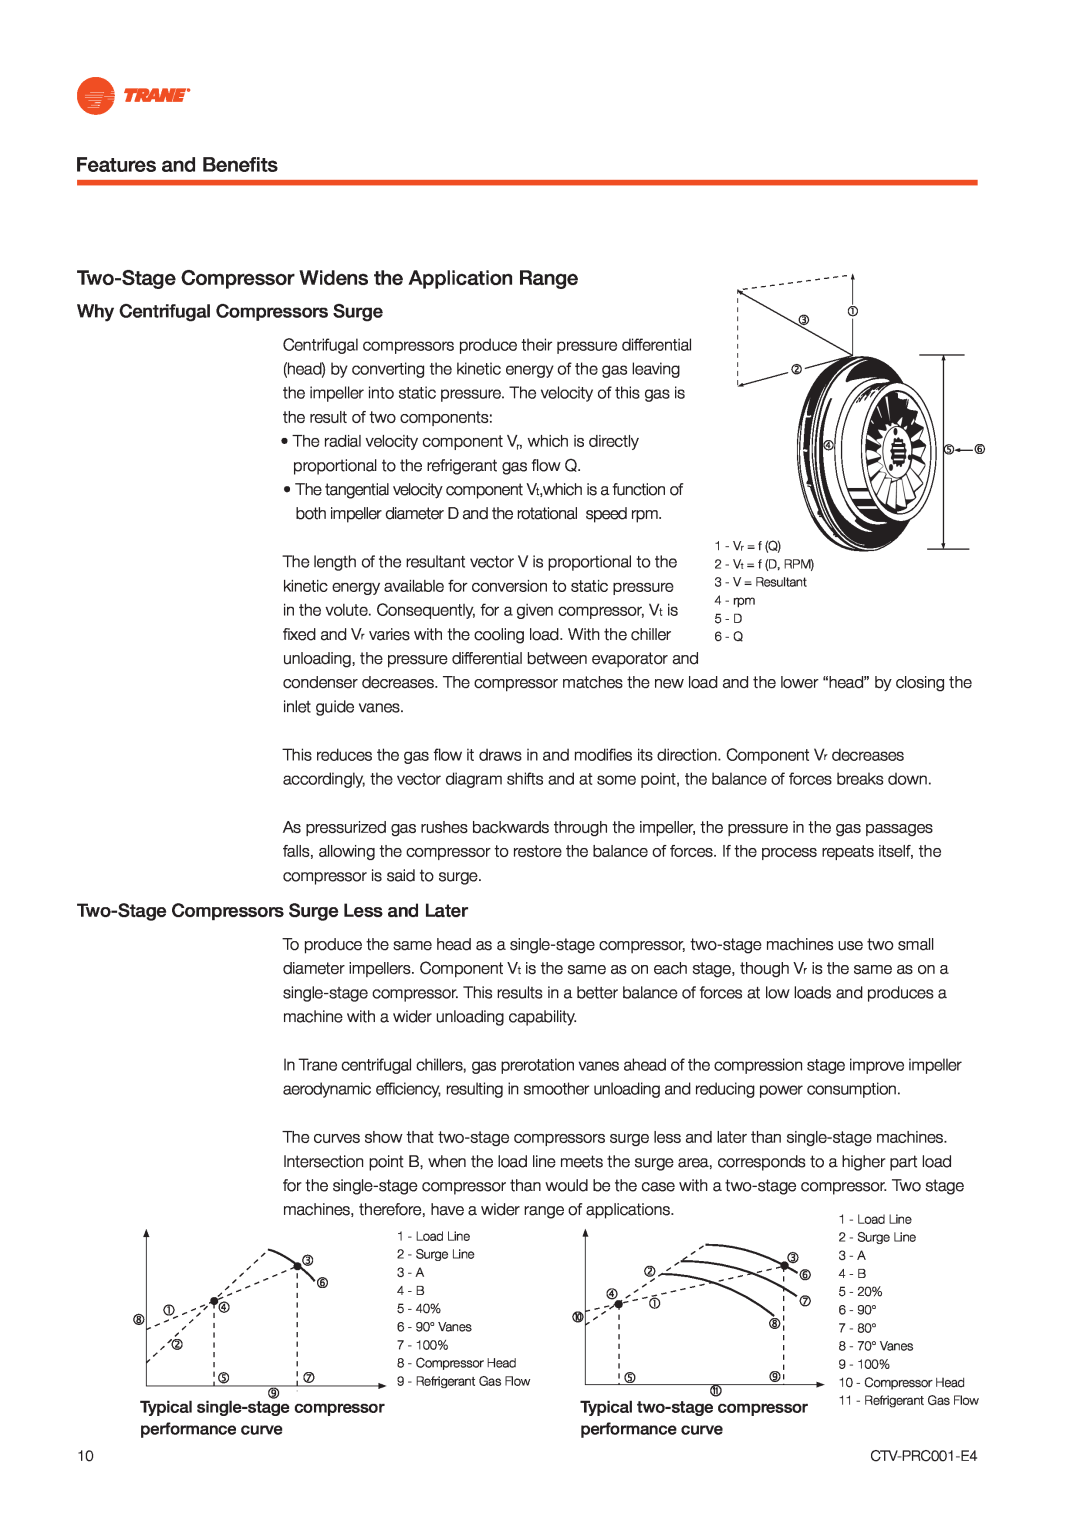 Trane CVGF manual Features and Beneﬁts, Two-StageCompressor Widens the Application Range, Why Centrifugal Compressors Surge 